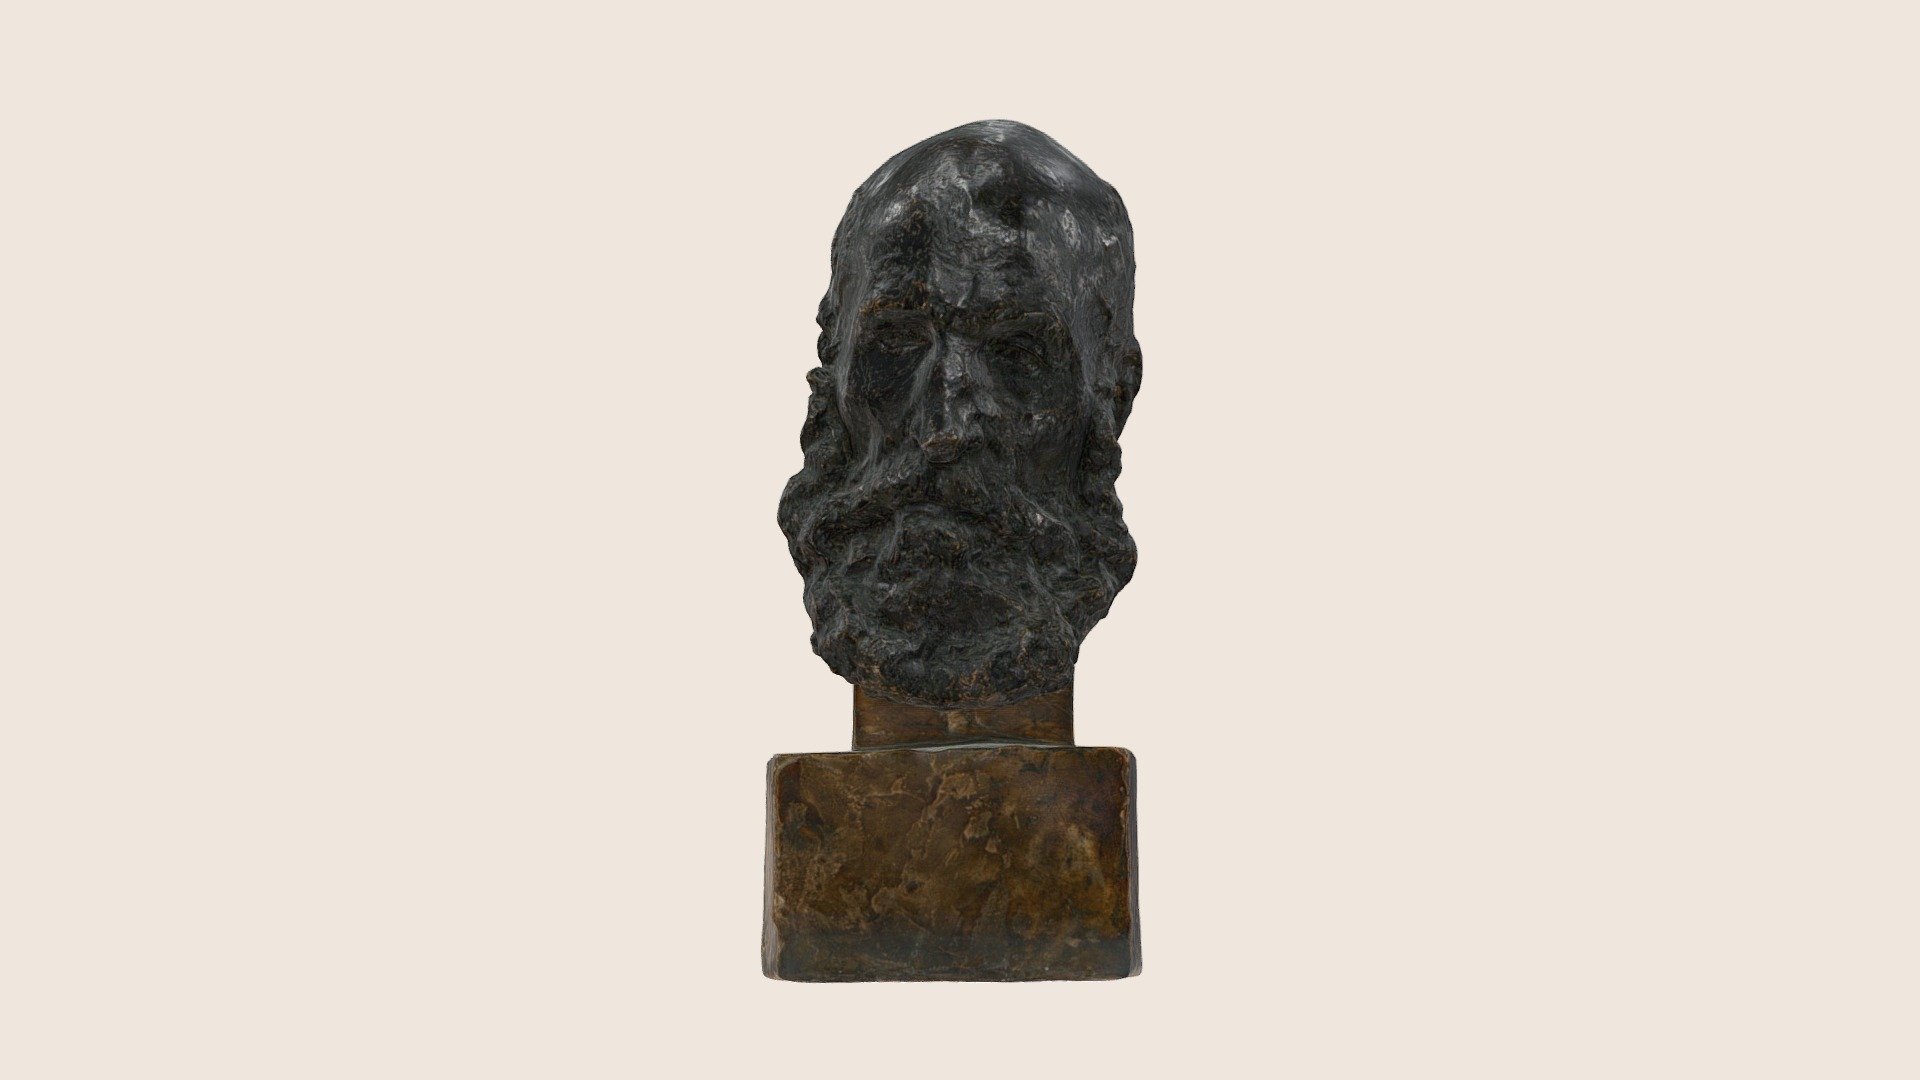 Name: The man's head

Material and technique: patinated plaster

Dimensions: 52 x 22 x 24 cm

Style: modern

Date of creation: 1912

Author, School, Workshop: Stanisław Szukalski

Place of exhibition: The National Museum in Szczecin, nr inw. MNS/SE-P/29

Website: https://muzeum.szczecin.pl/en/about/history.html

Description:

Technology used: 3D handheld scanner

Made by: Piotr Bialobrzycki

Copyright: Copyright © 2021 FWNDK. All rights reserved - The man's head - 3D model by FWNDK 3d model